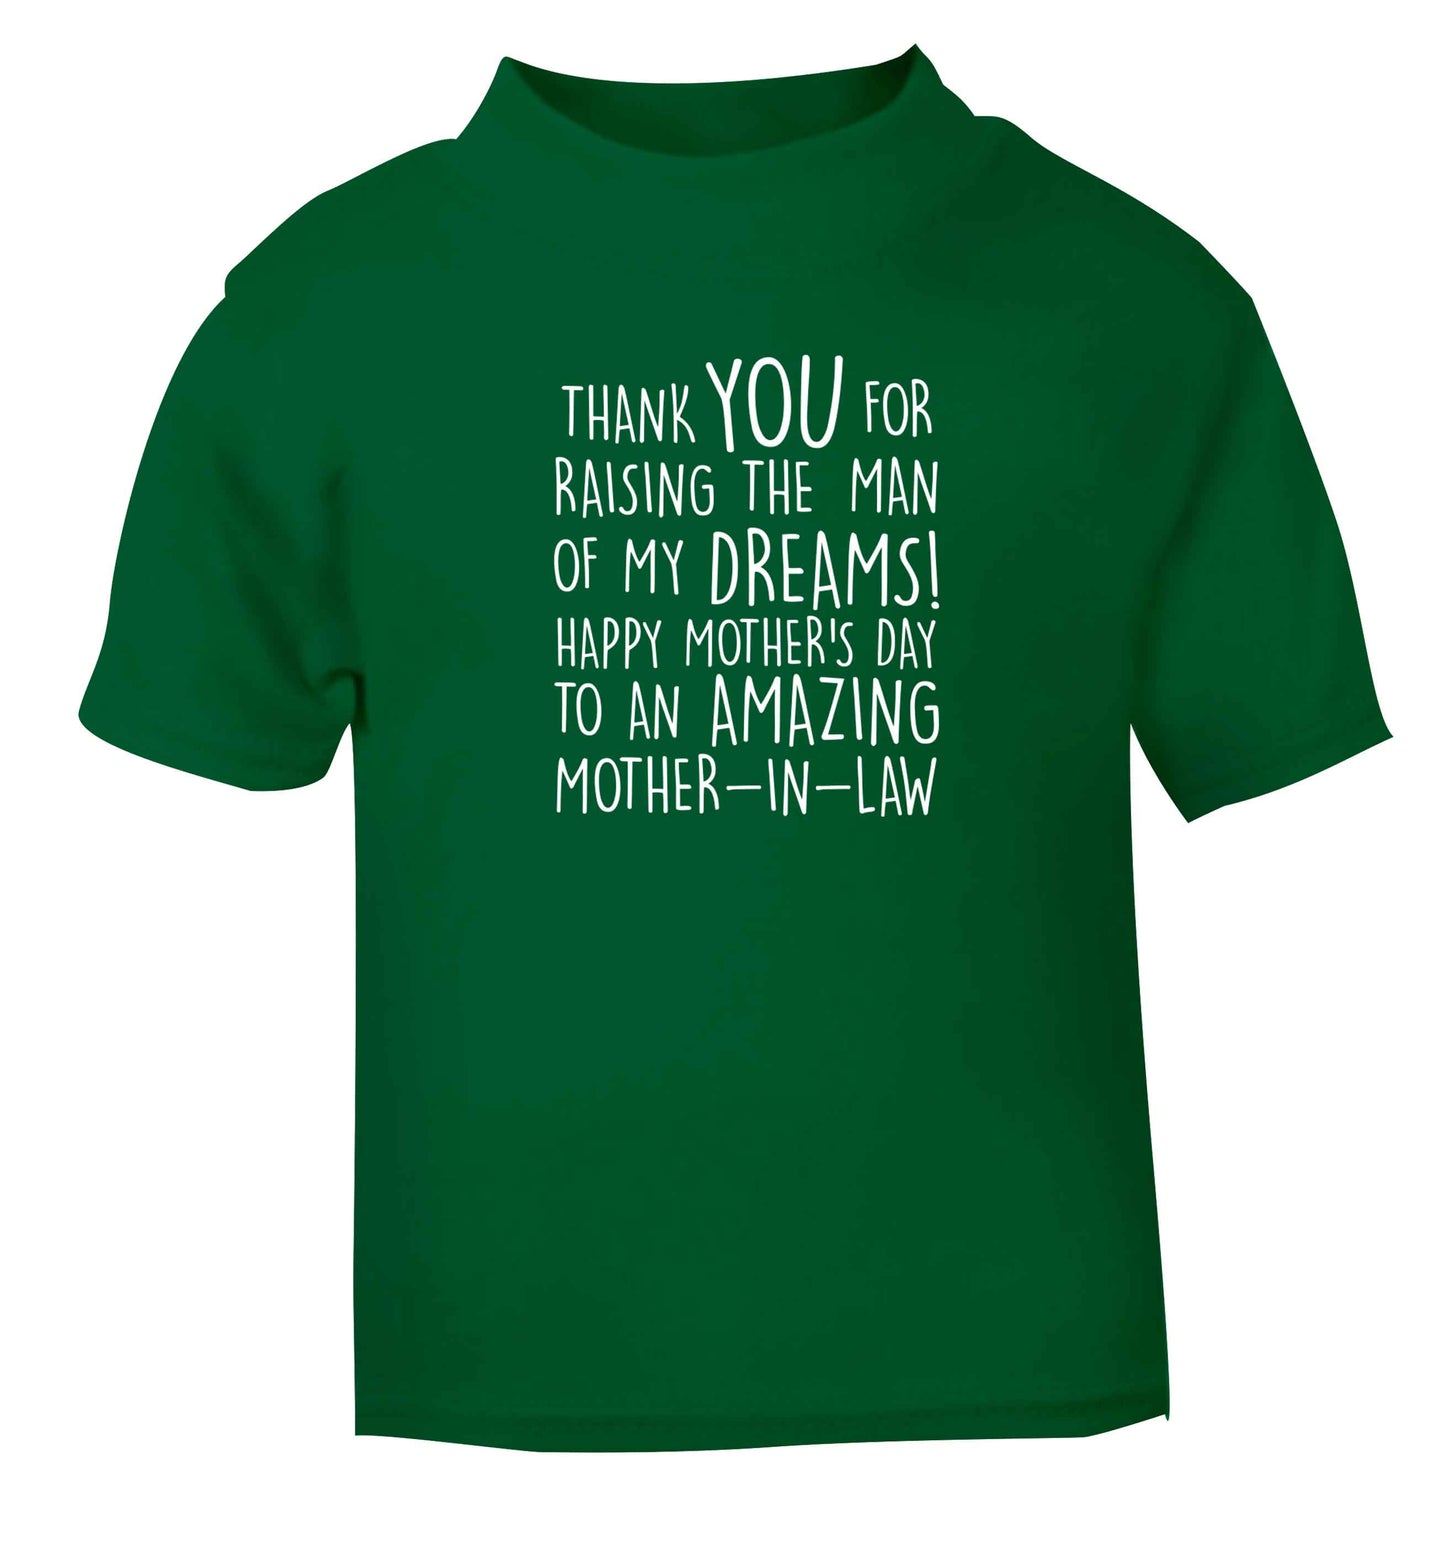 Raising the man of my dreams mother's day mother-in-law green baby toddler Tshirt 2 Years